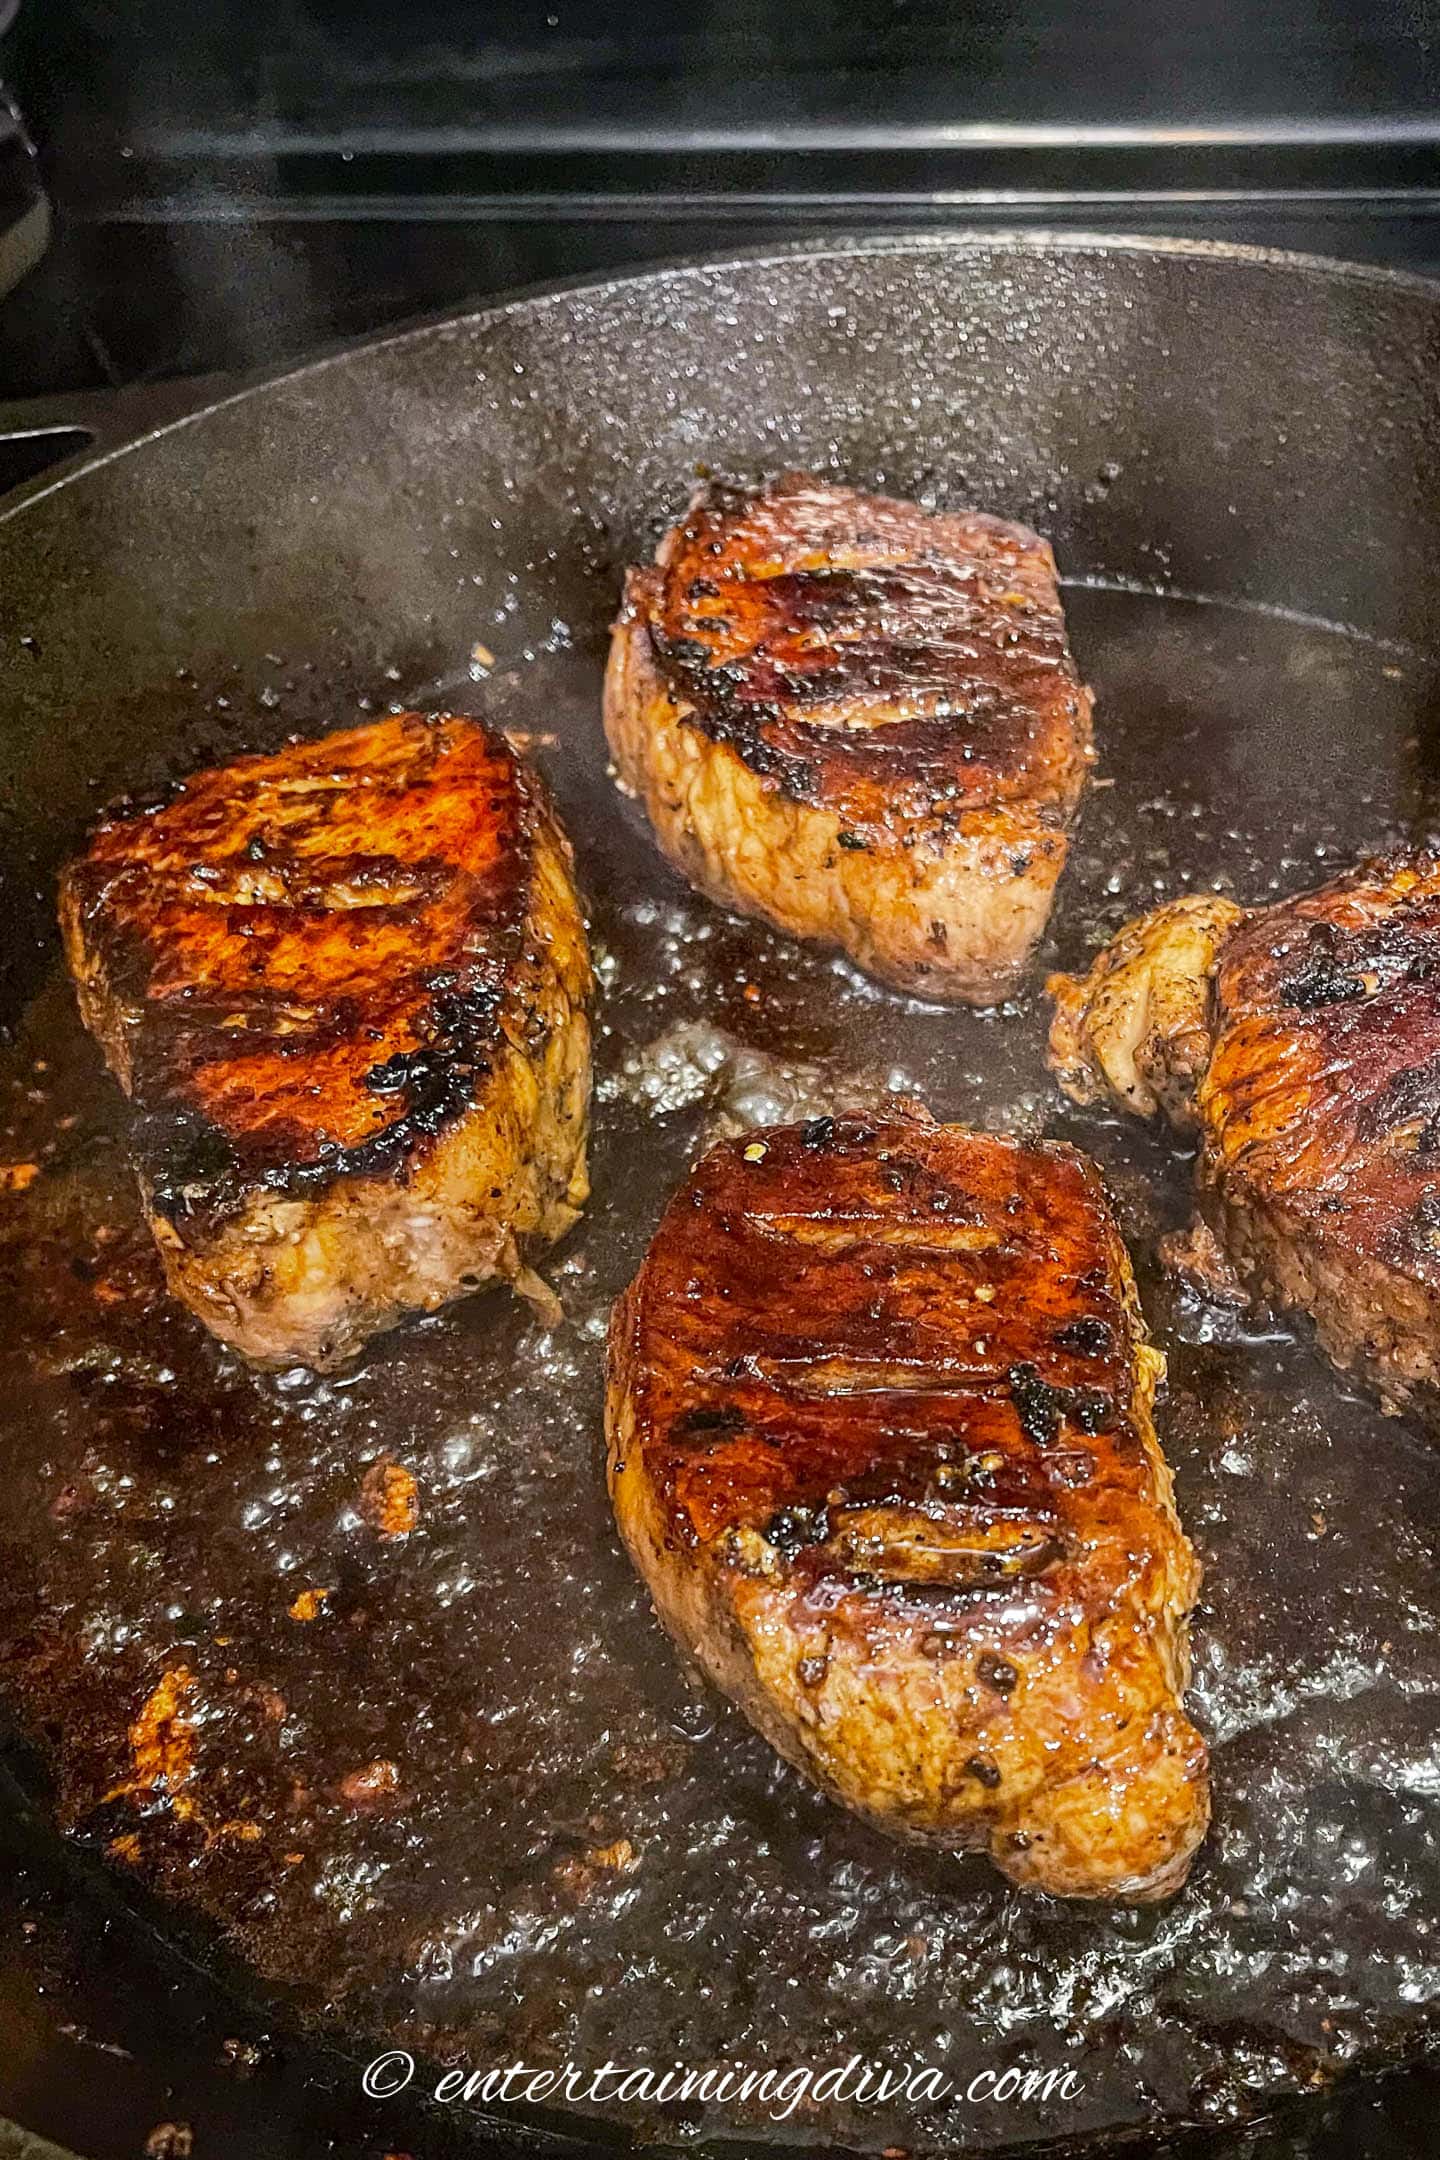 Thick pork chops covered in marinade in a frying pan